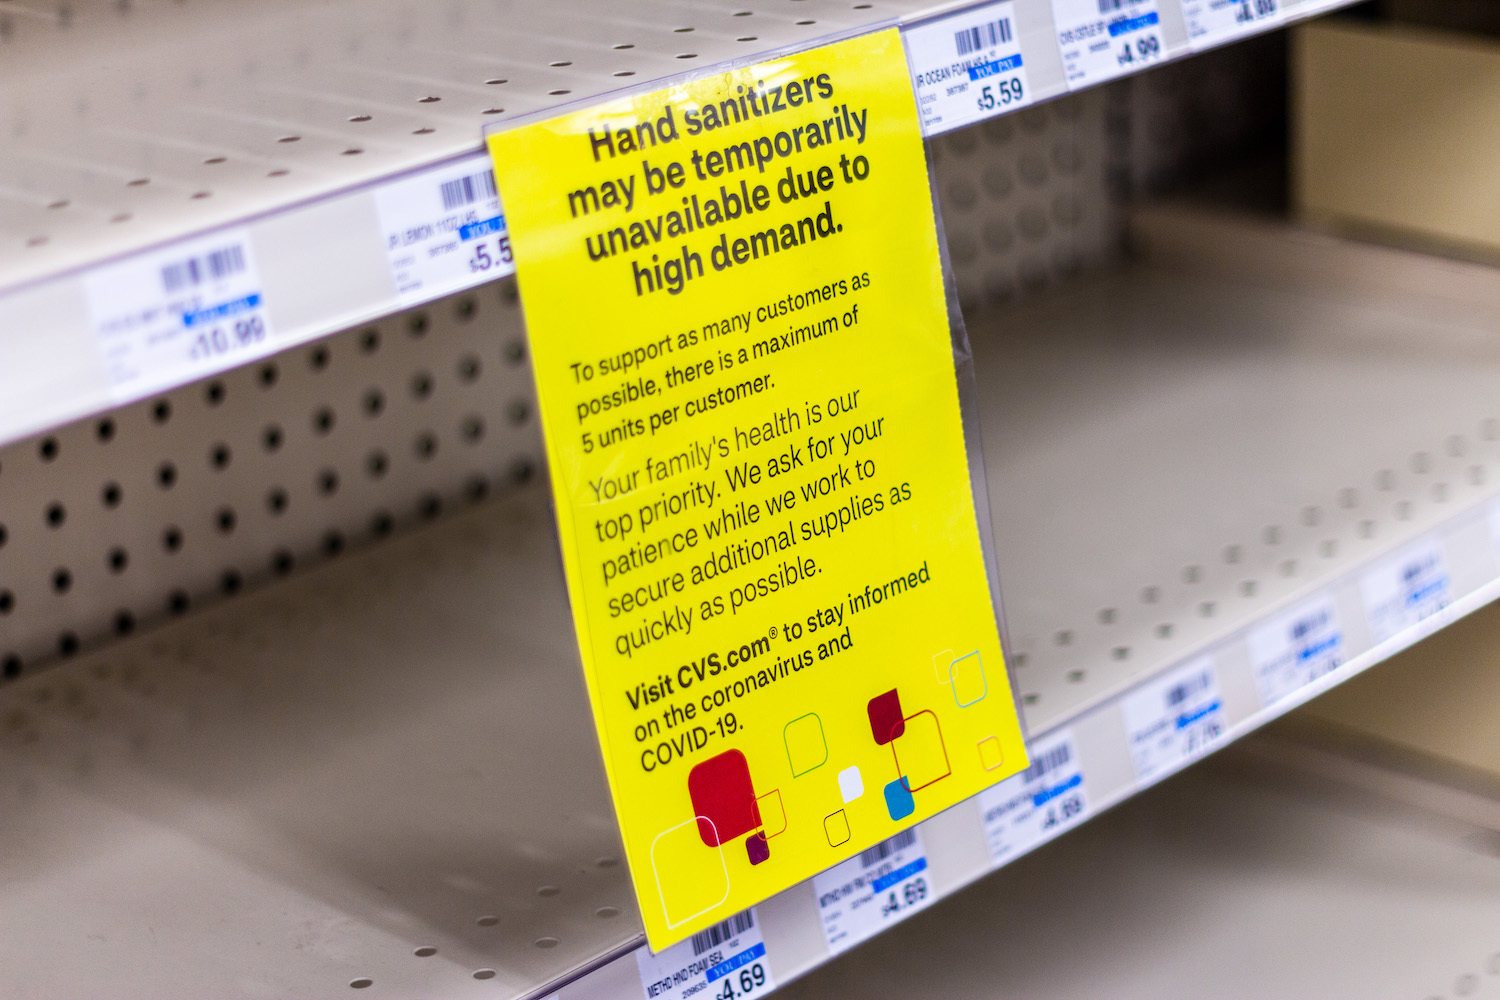 Empty shelves for hand sanitizer with a sign noting they may be temporarily unavailable due to high demand at a CVS in Arlington, VA during COVID-19 outbreak